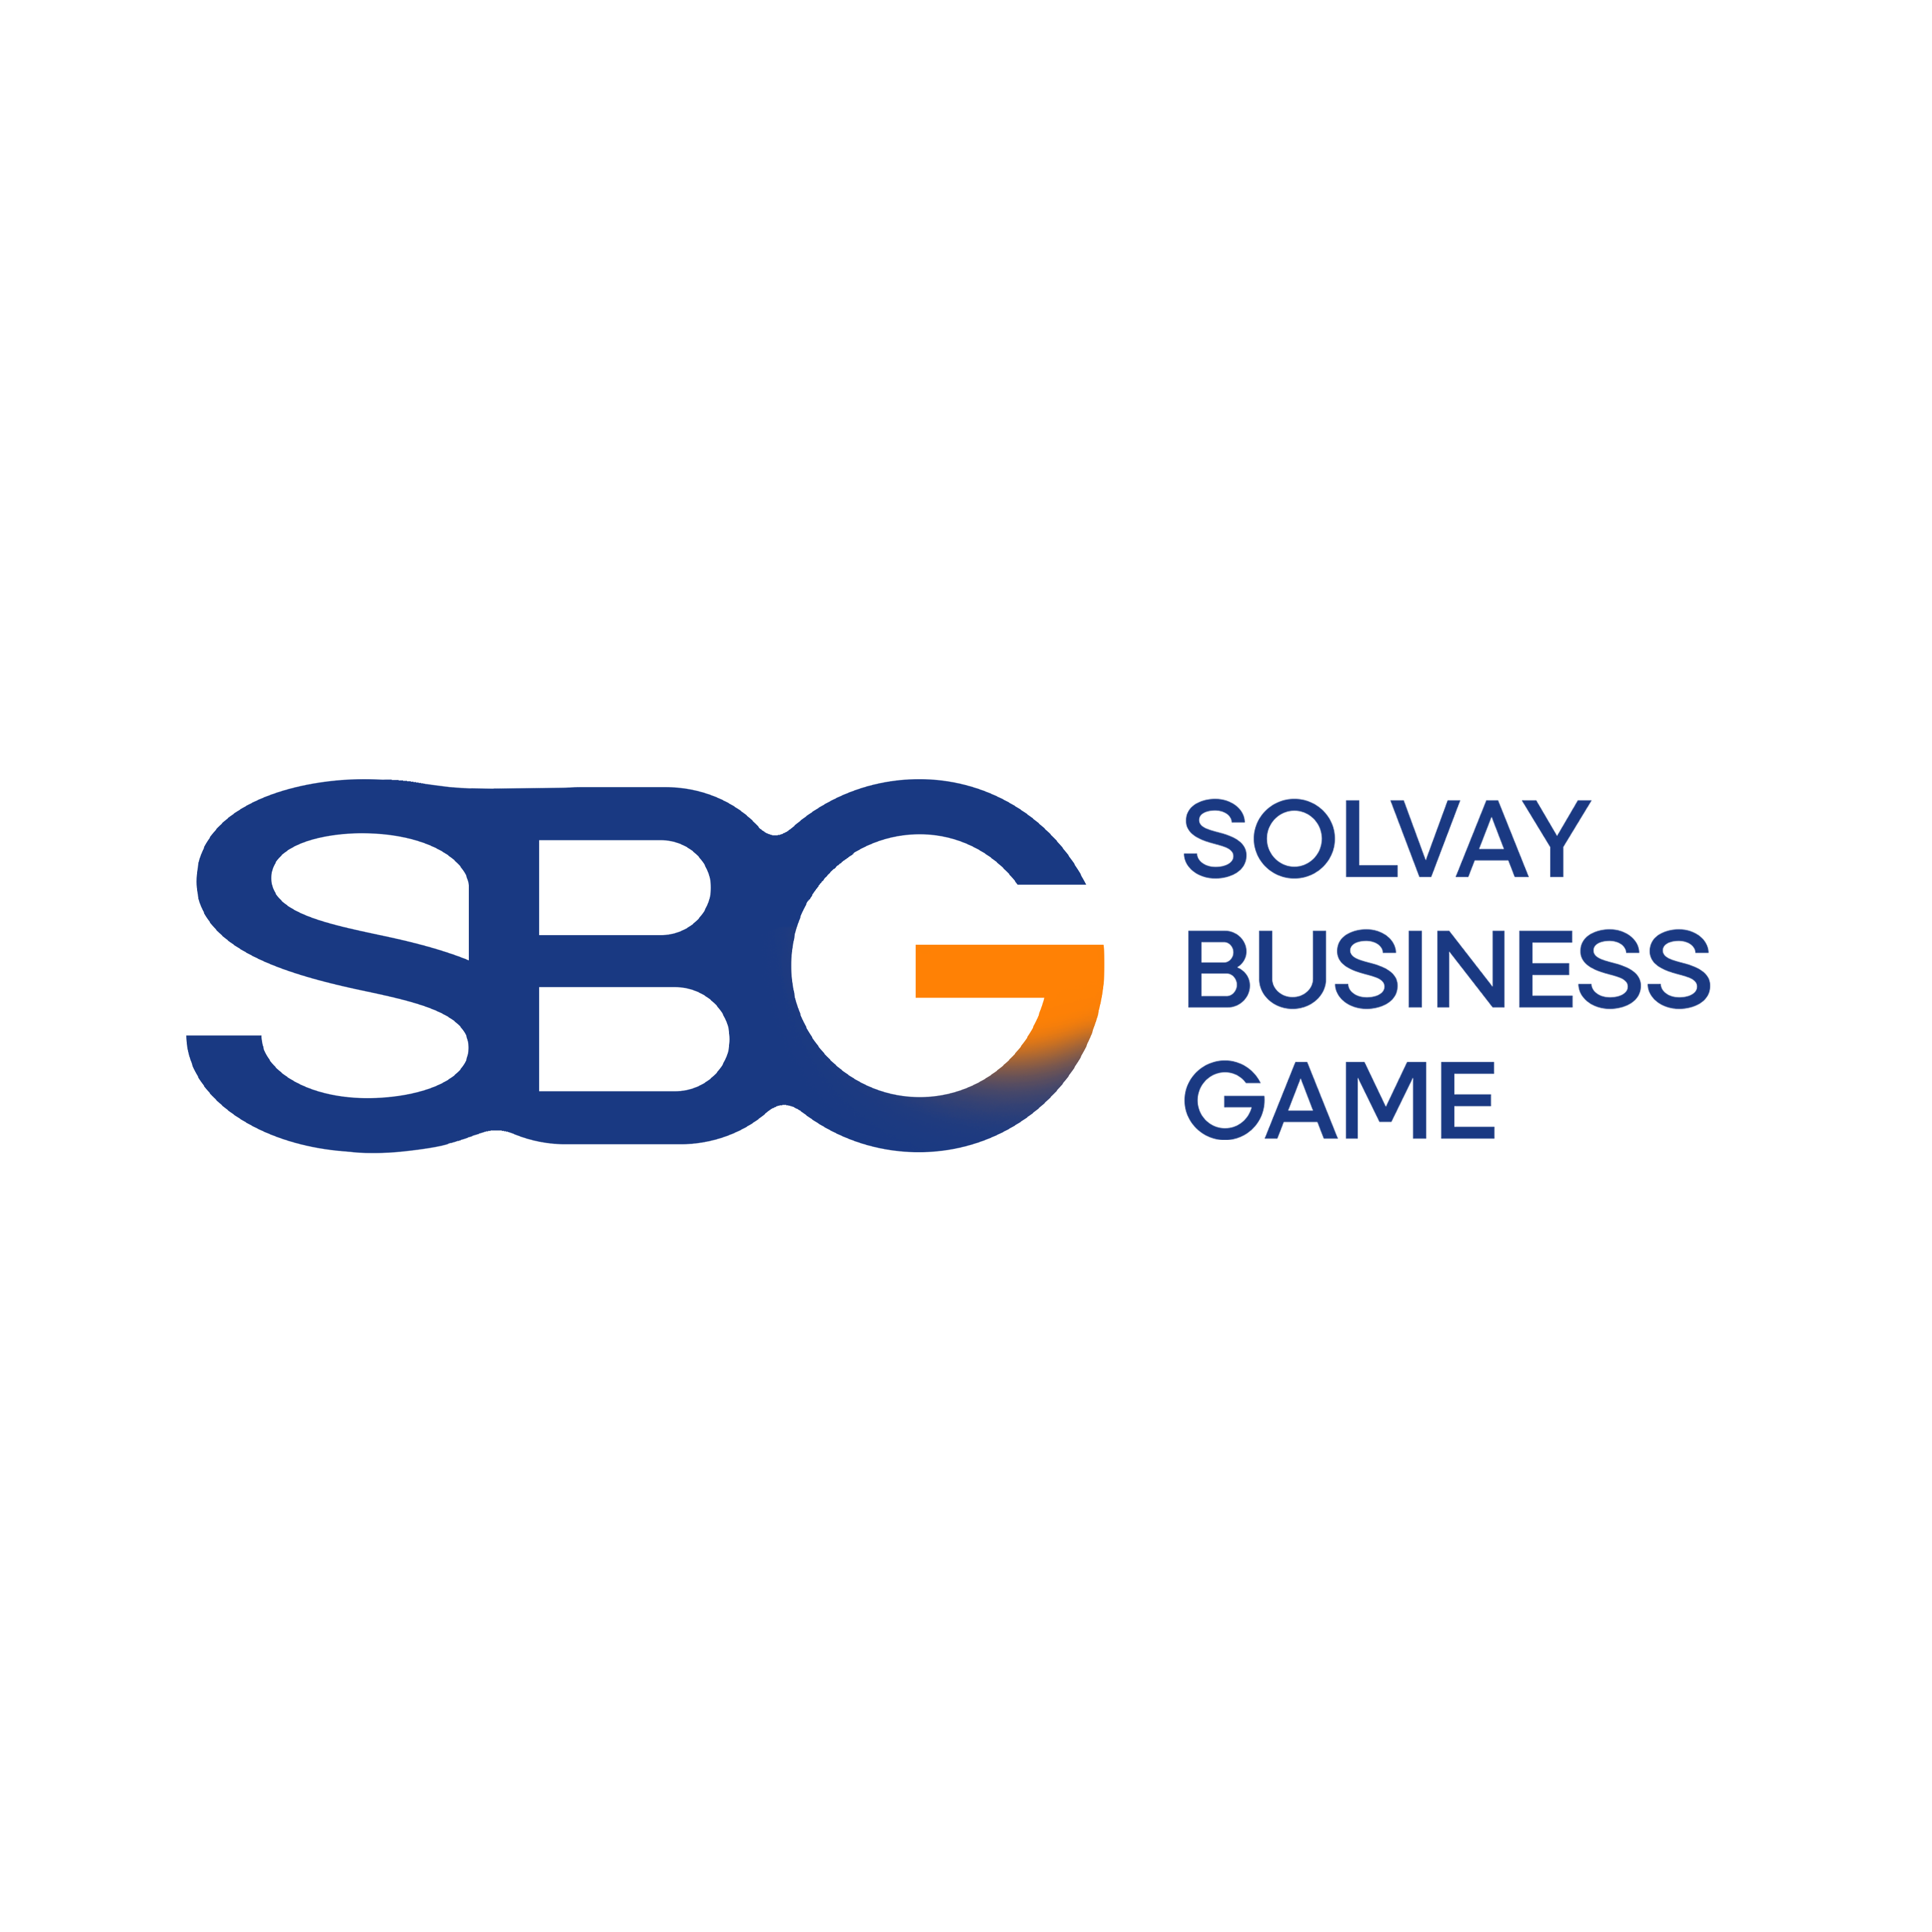 Solvay Business Game